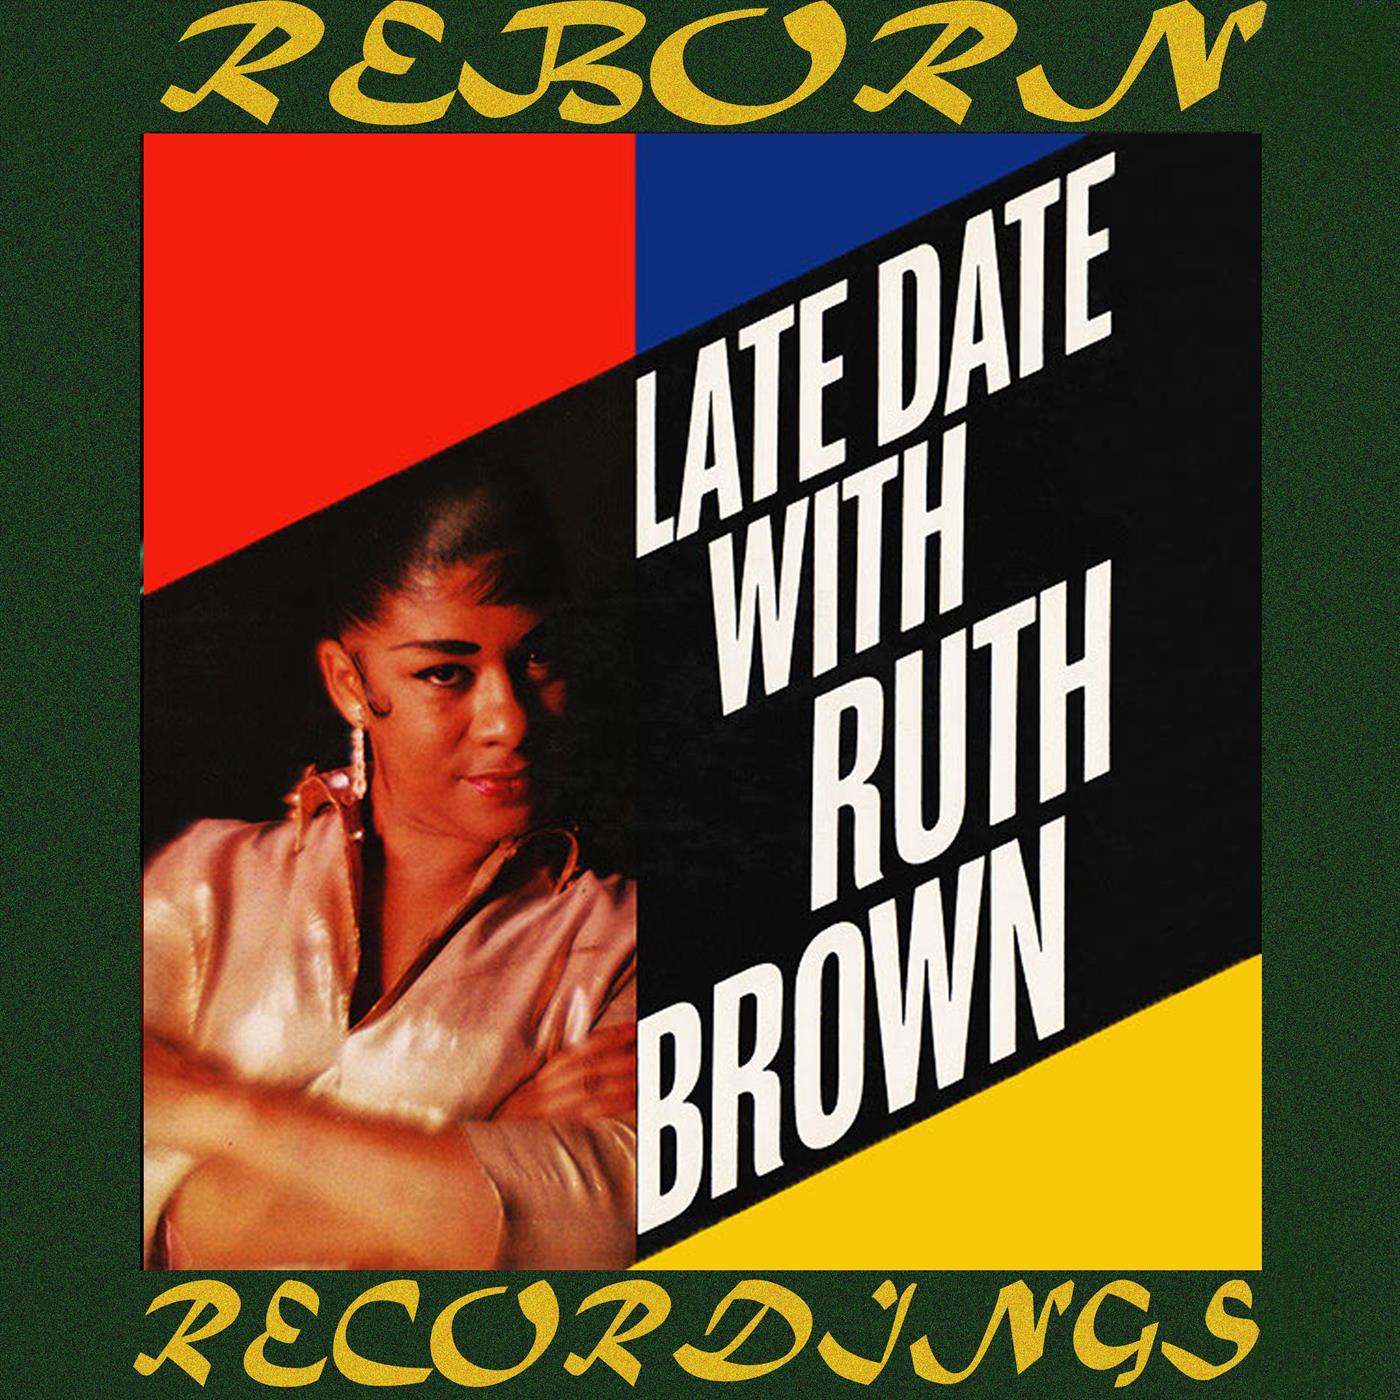 Late Date with Ruth Brown (HD Remastered)